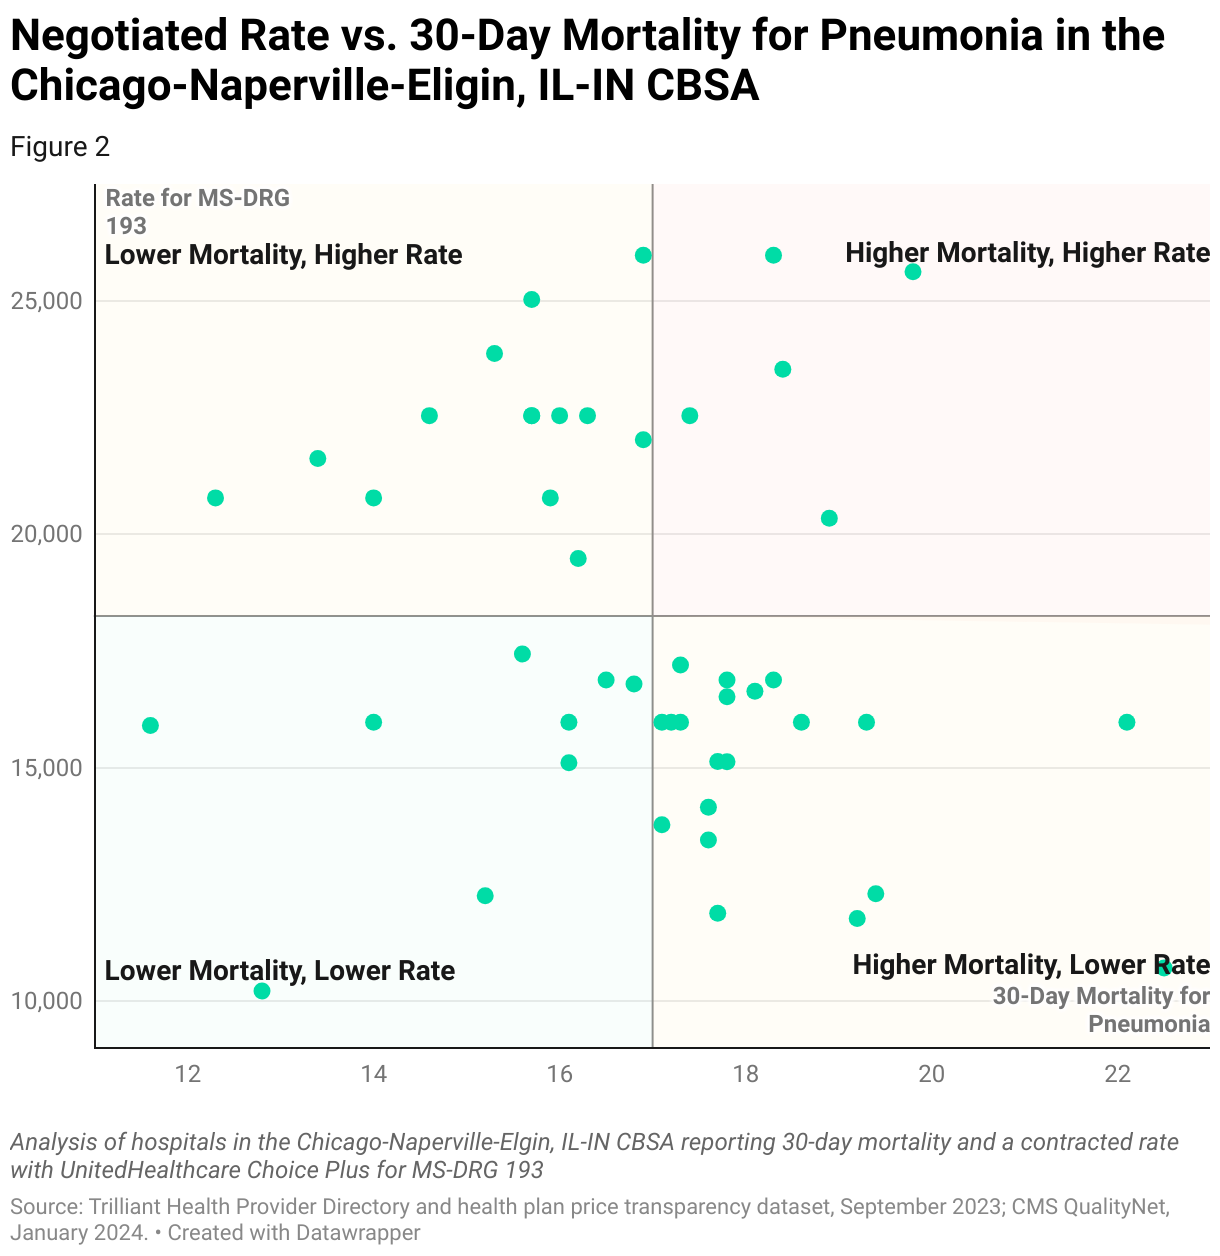 Chart comparing UnitedHealthcare Choice Plus in-network negotiated rates with 30-day post-discharge mortality for Pneumonia for hospitals in the Chicago-Naperville-Elgin, IL-IN CBSA